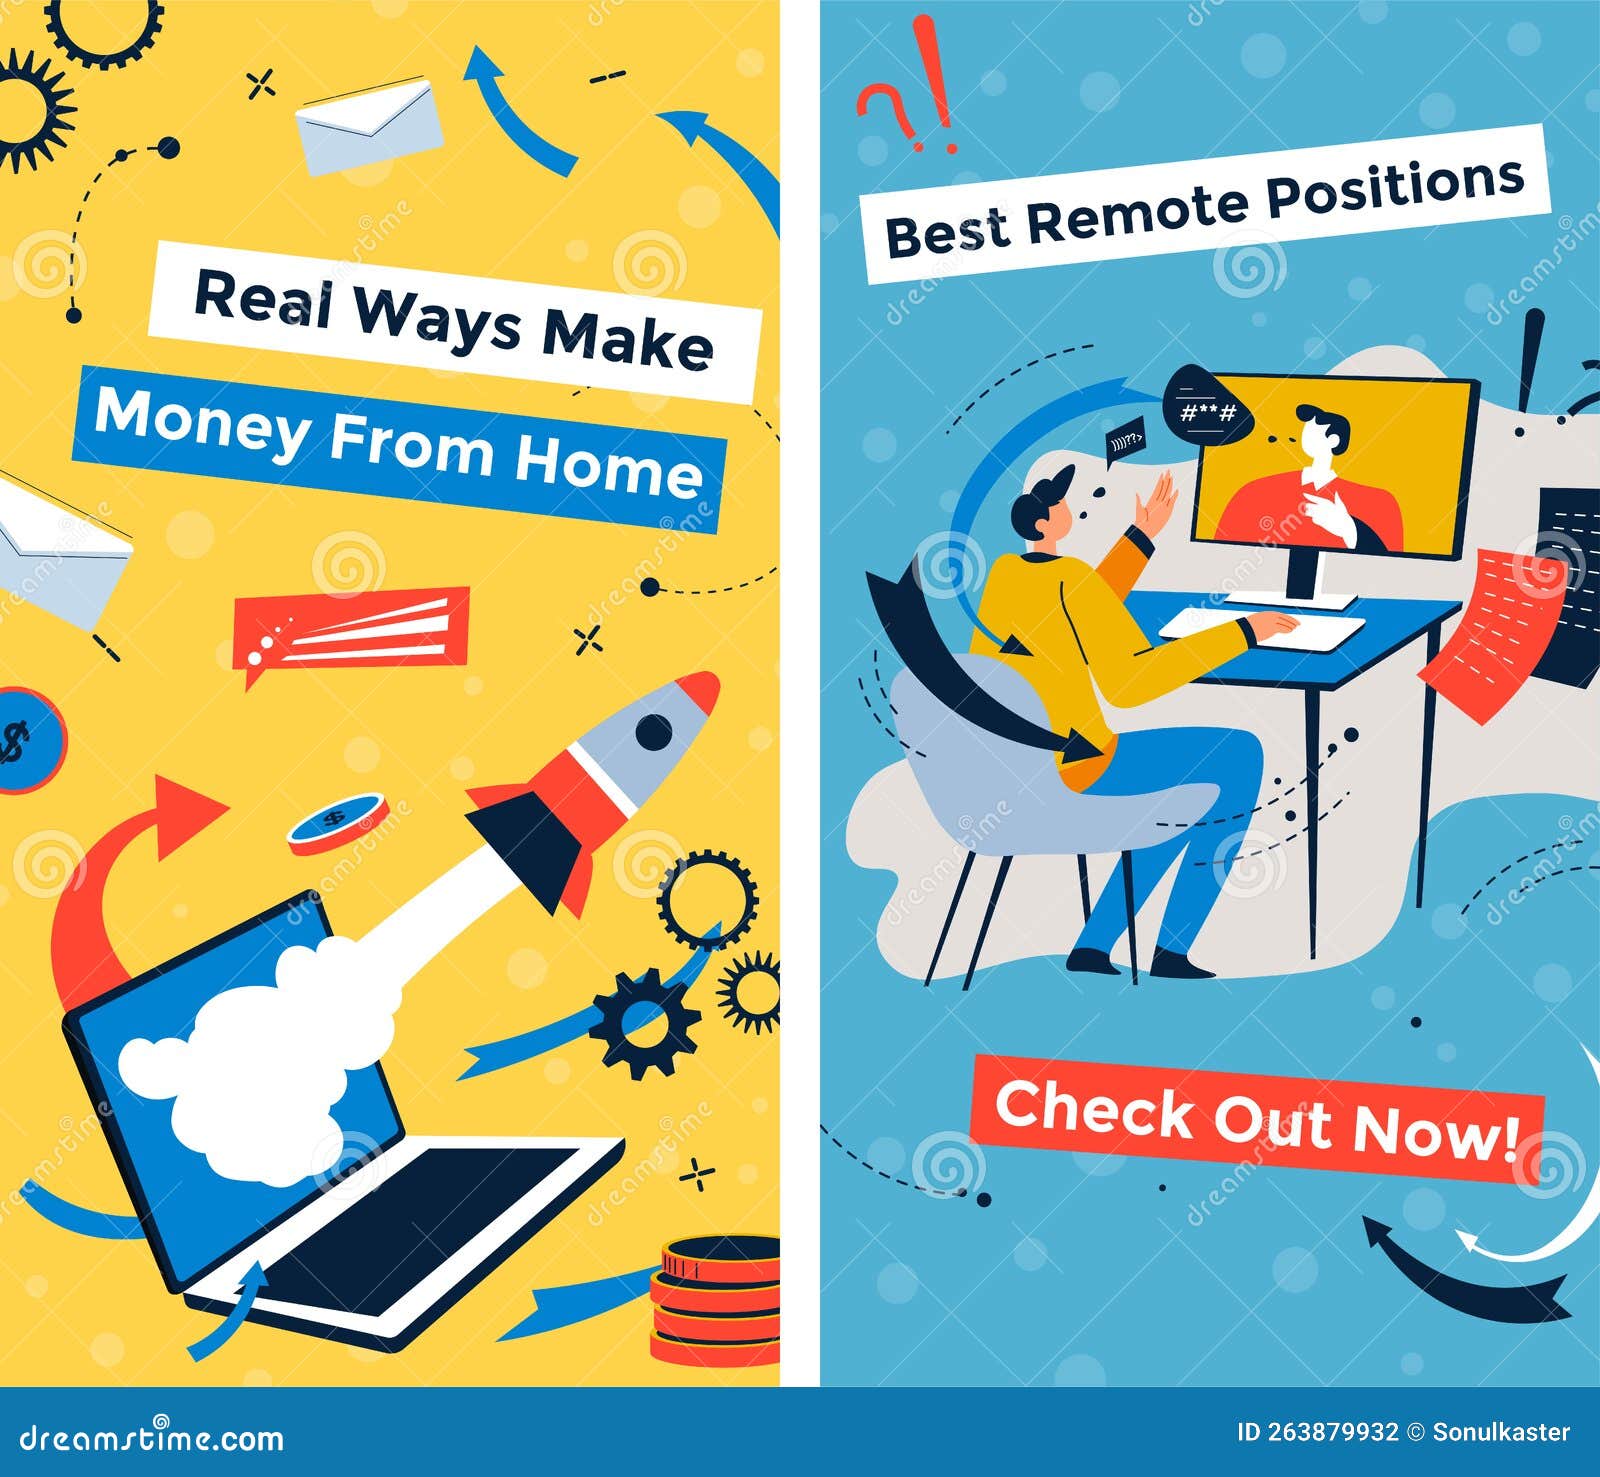 Real Ways Make Money from Home, Remote Position Stock Illustration